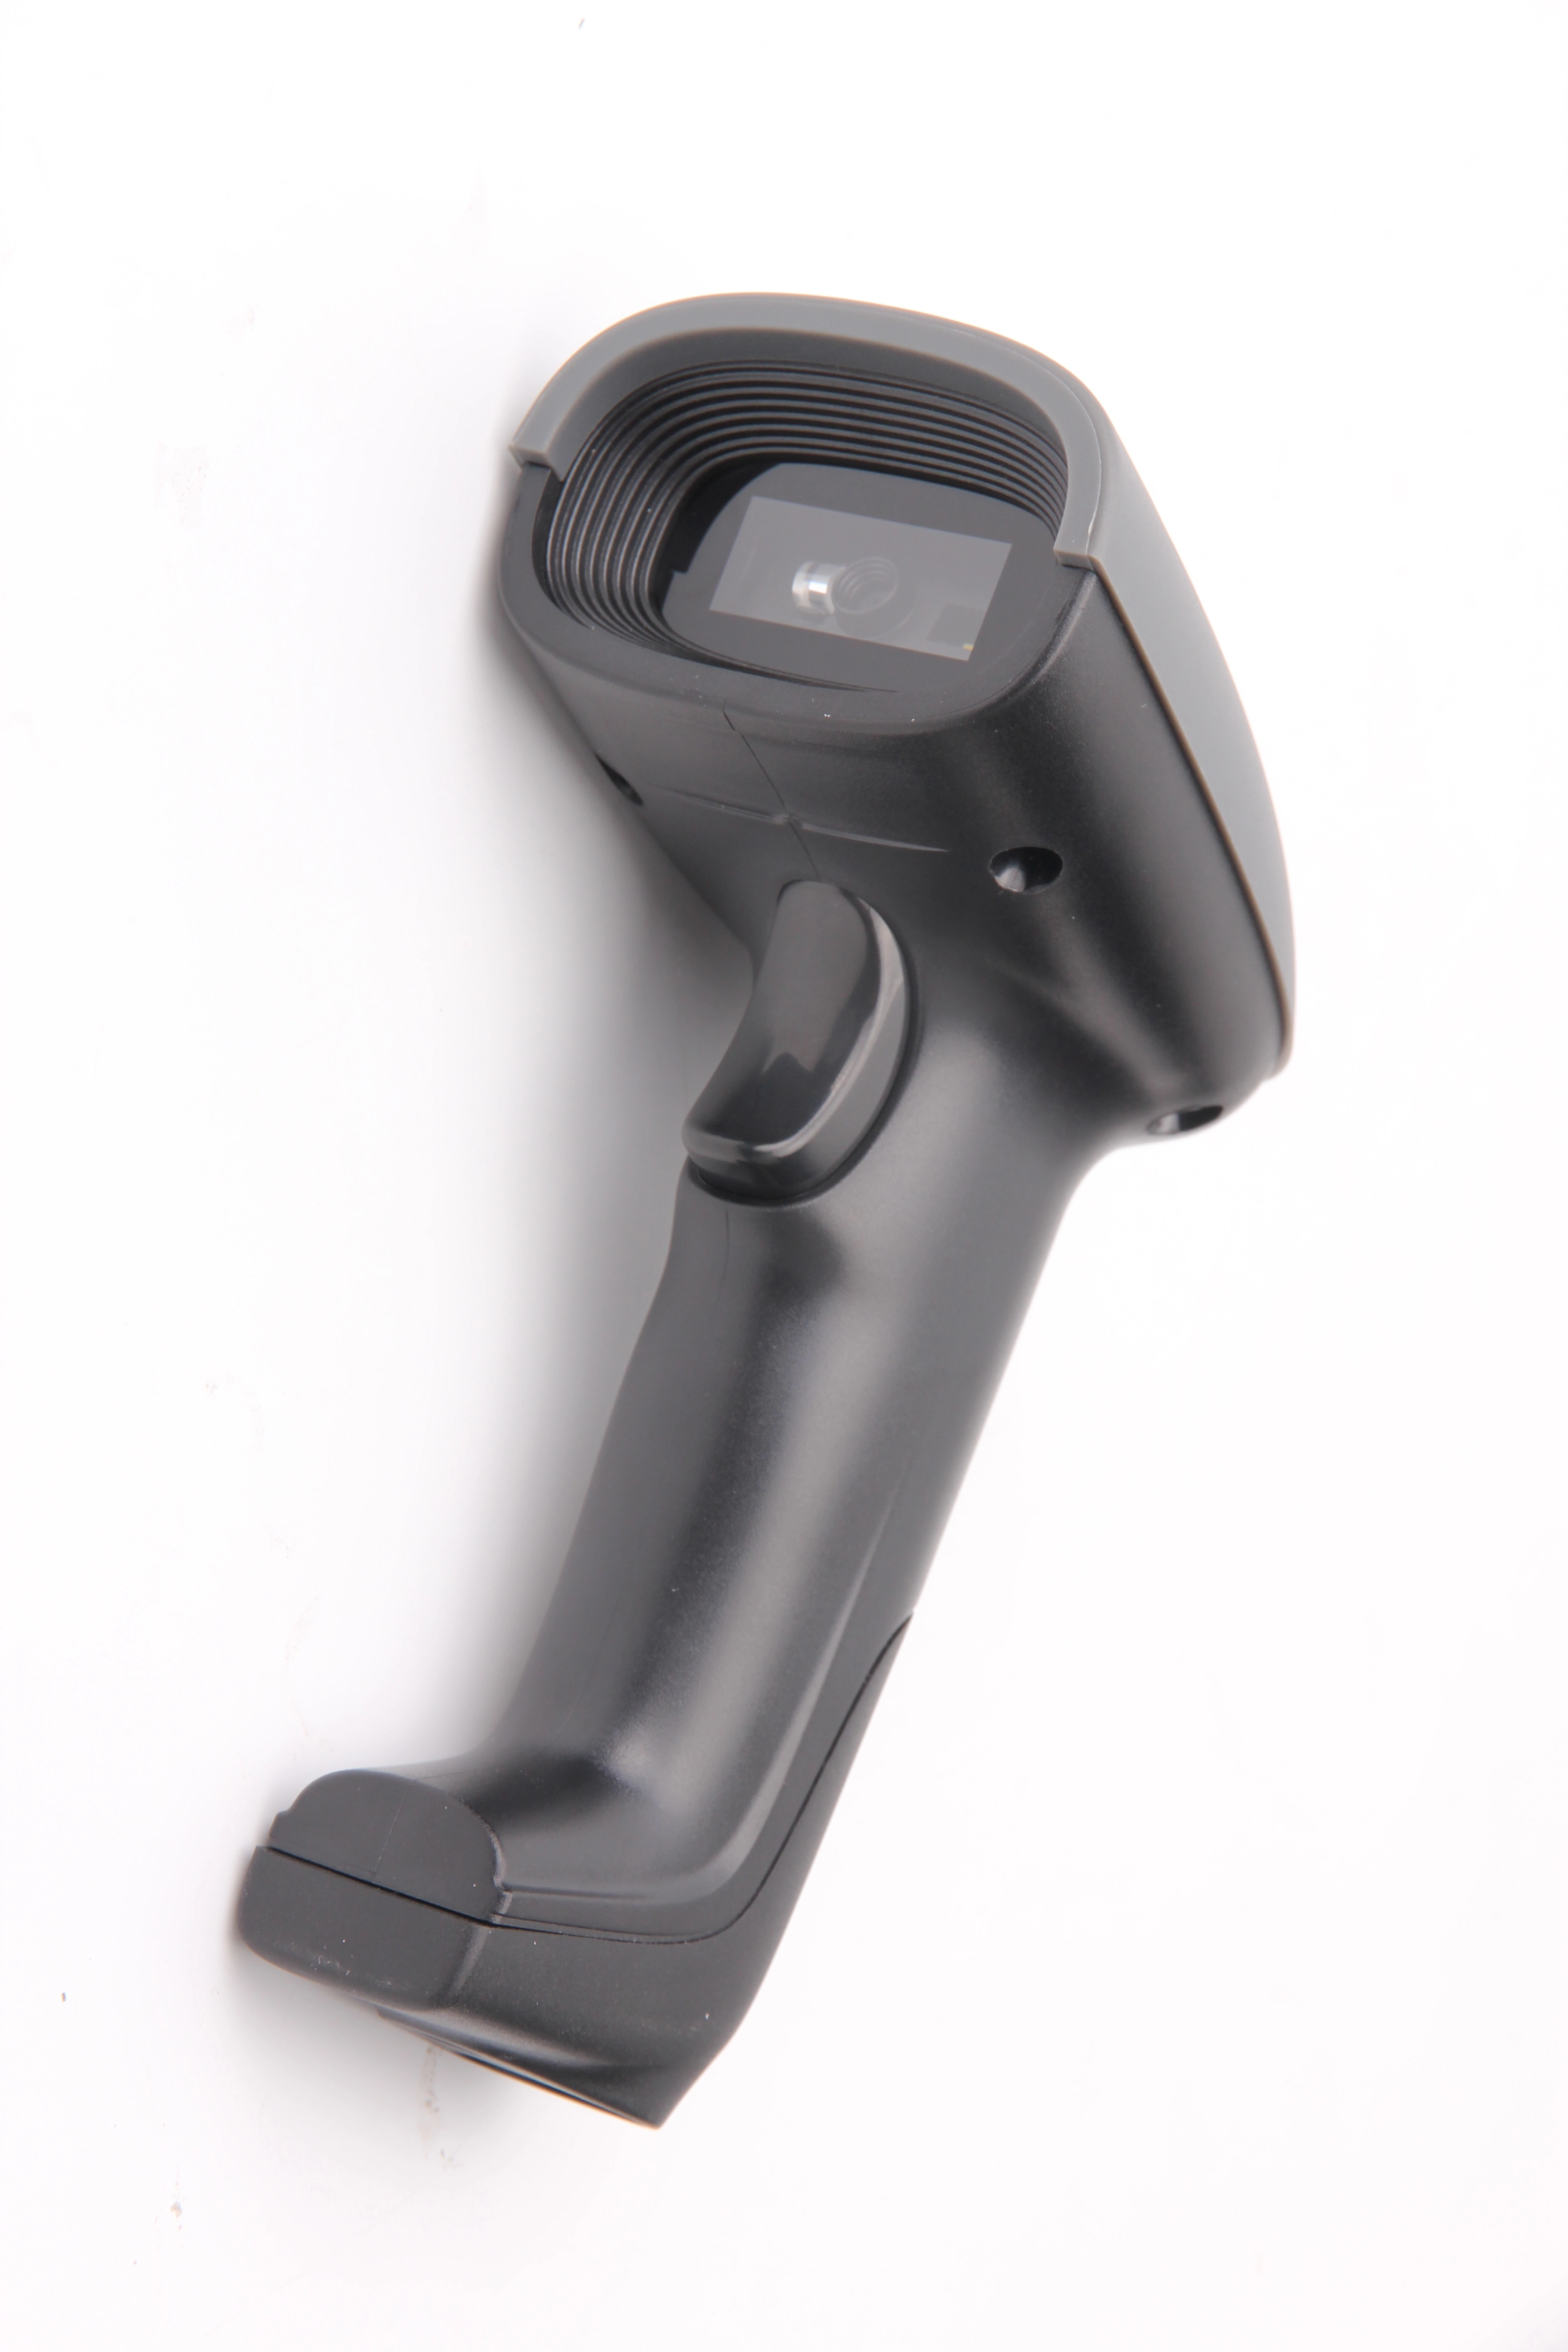 ESYPOS EBS-3312 2D WIRED BARCODE SCANNER-1